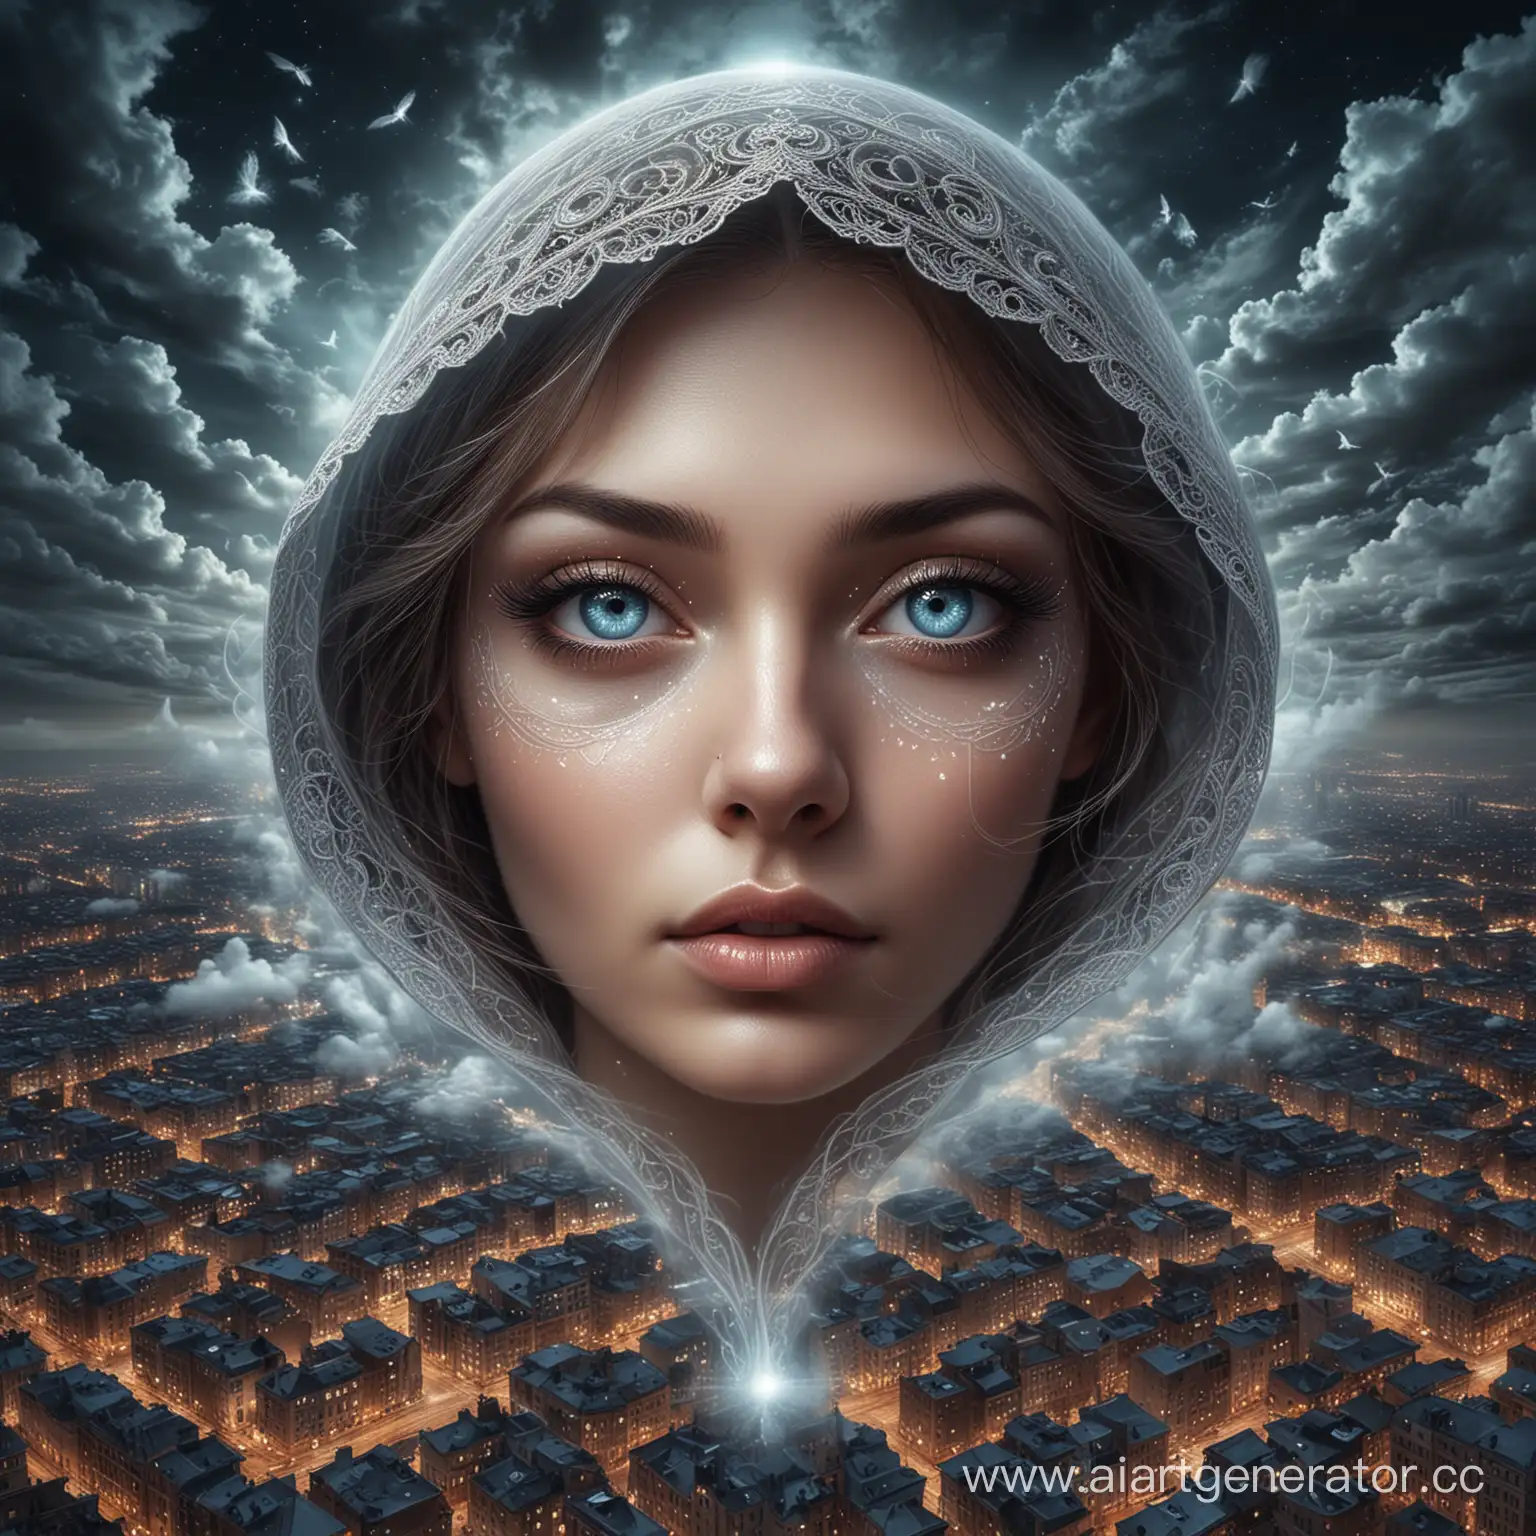 Ethereal-Female-Eyes-in-Clouds-Above-Night-City-Fantasy-Mysticism-Surrealism-Art